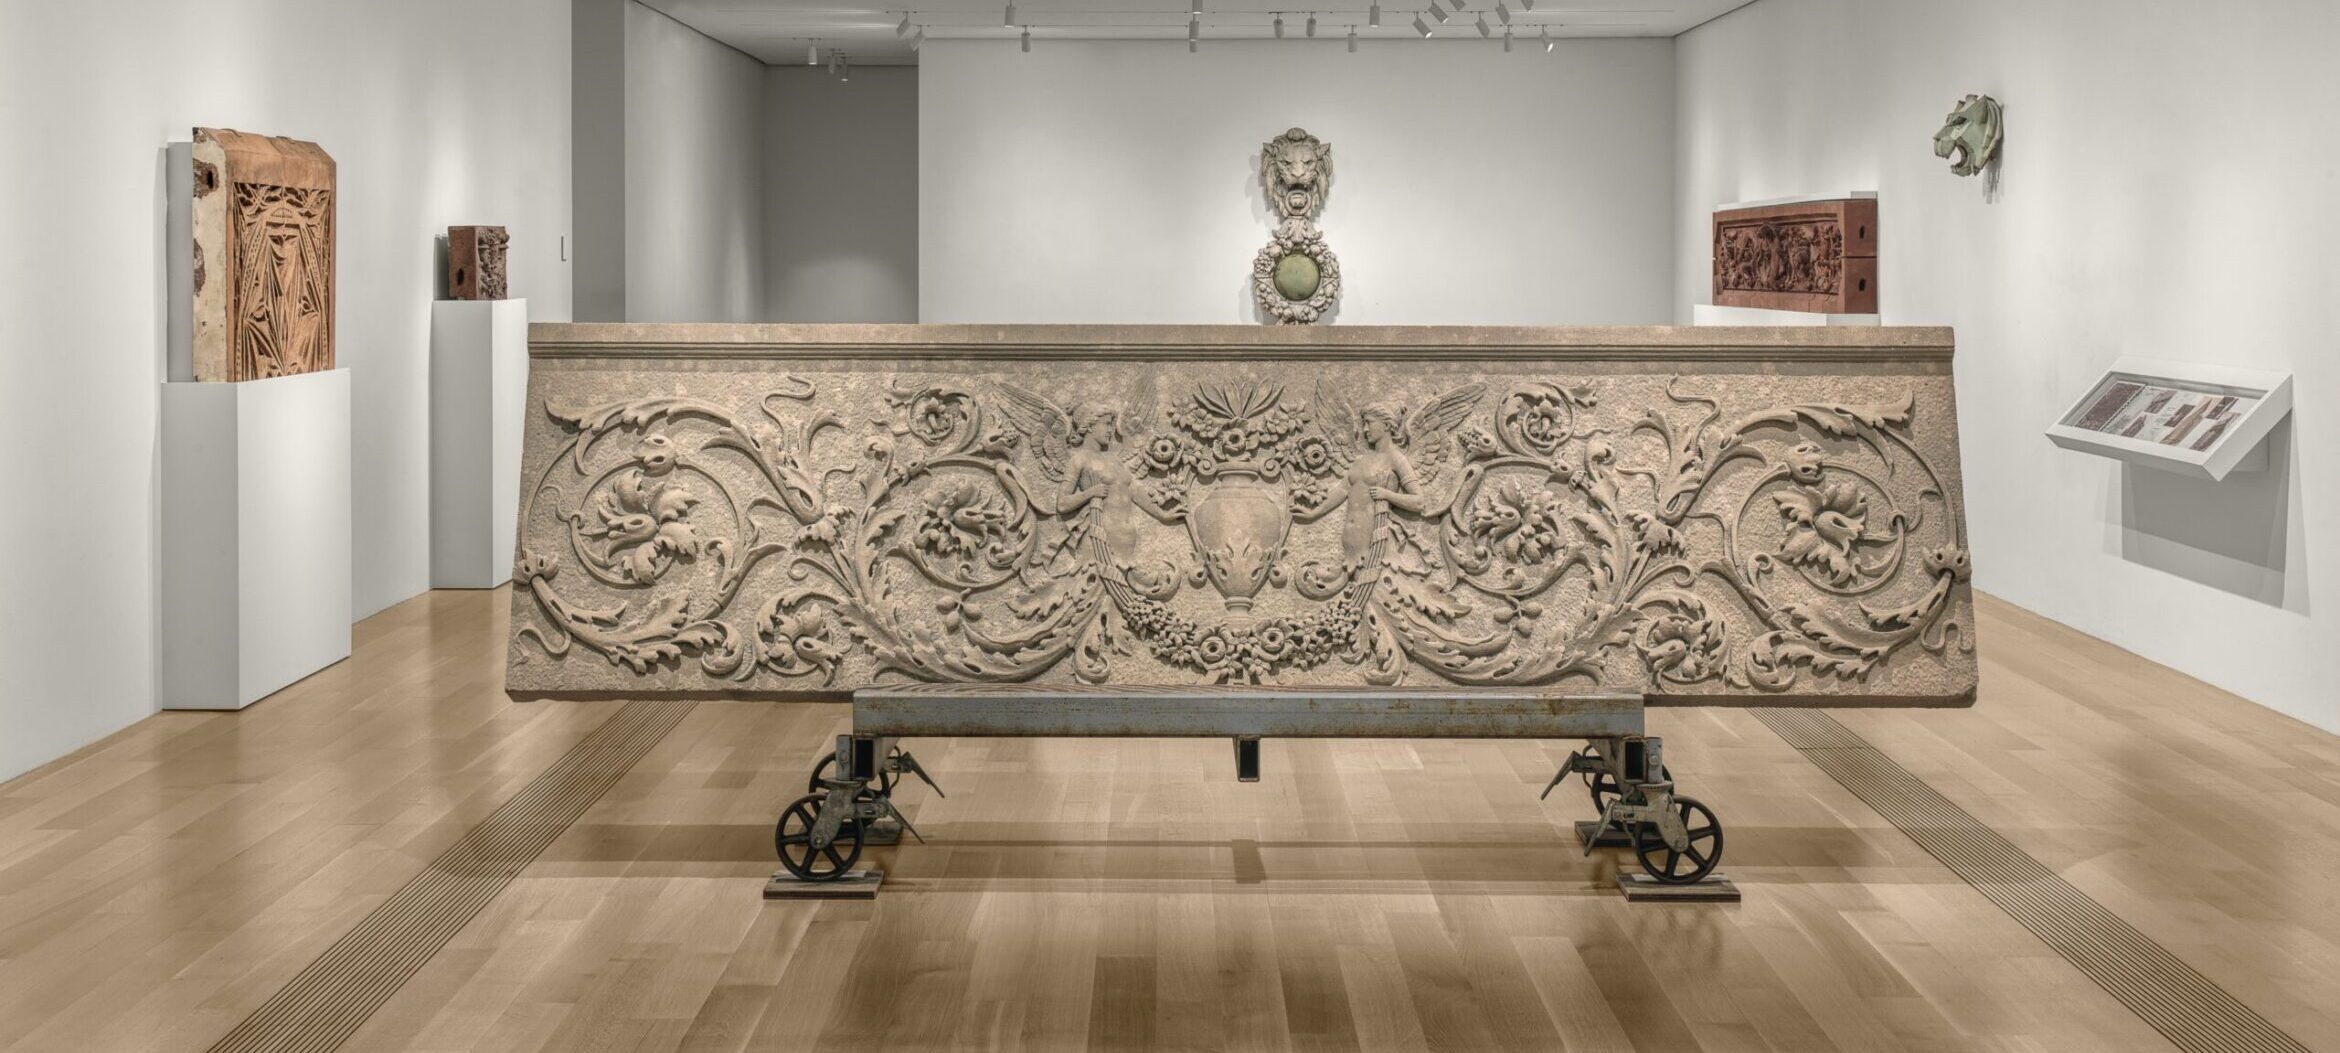  Large horizontal relief sculpture with intricate details of two woman and a bird in the middle, made of limestone.